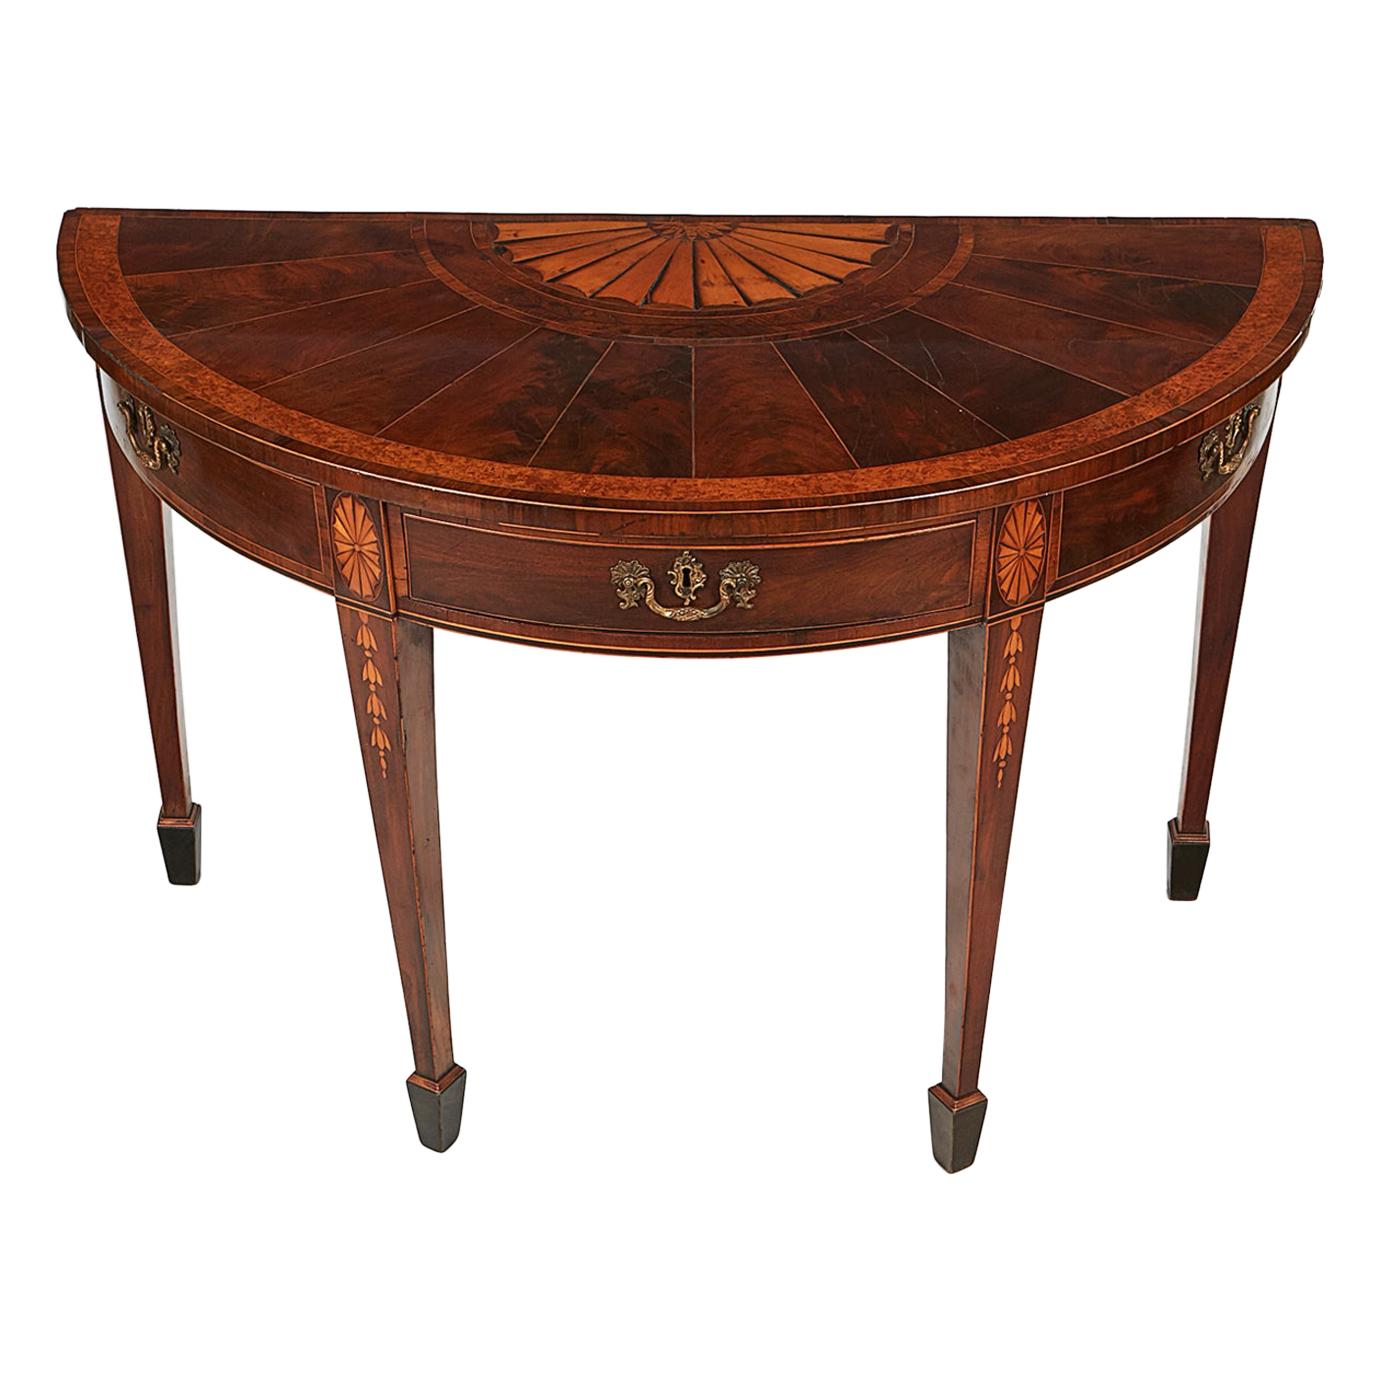 Early 19th Century Regency Demilune Table after William Moore For Sale